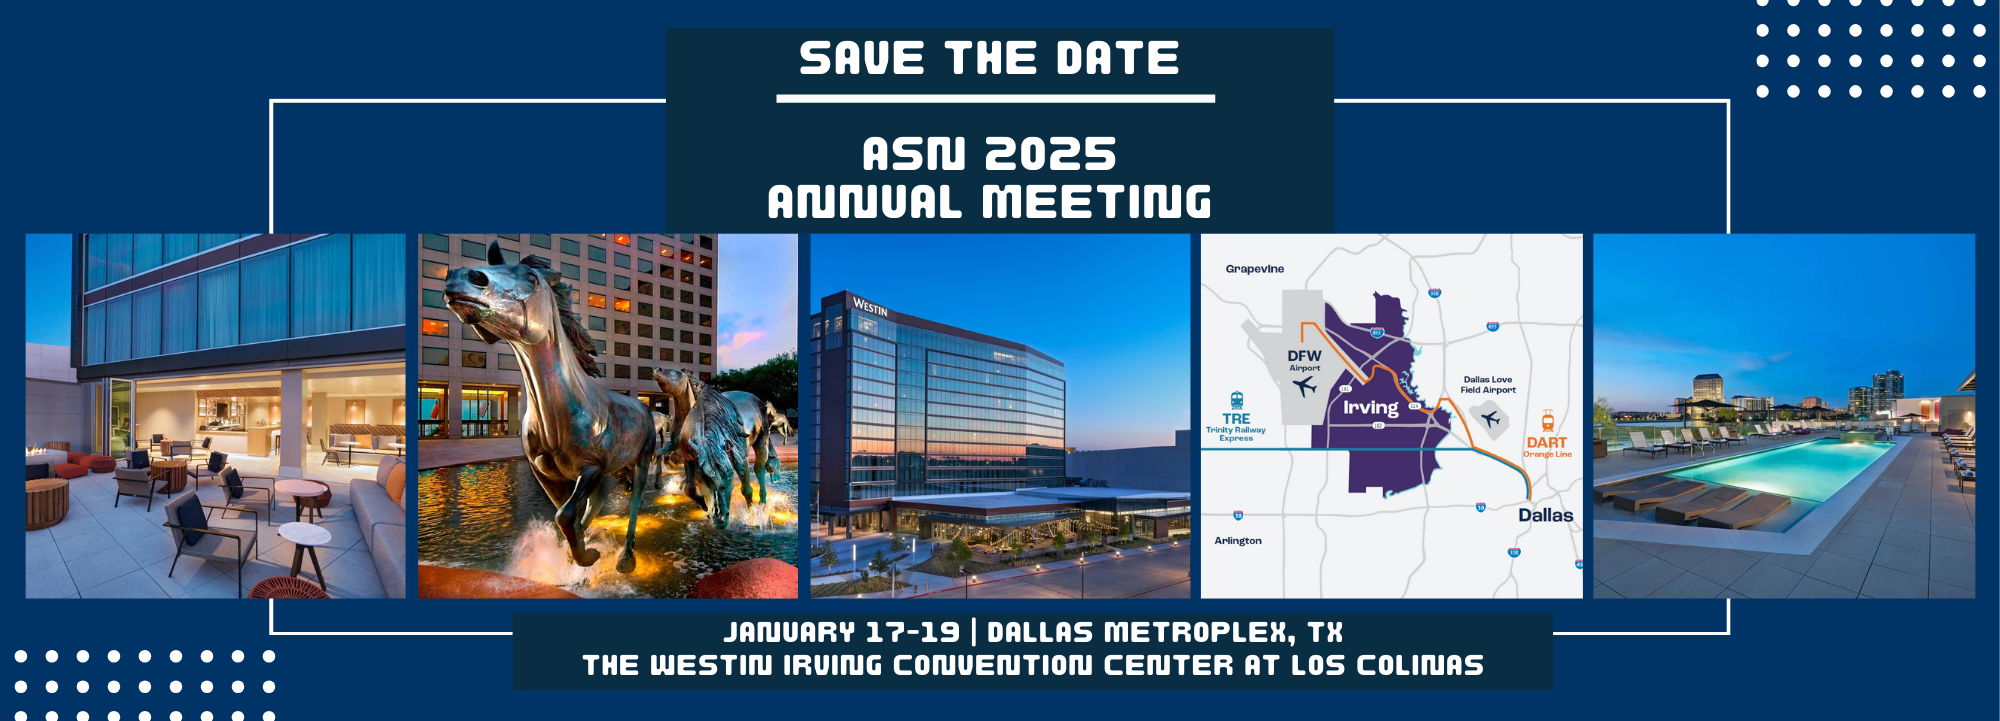 Save the Date 2025 Annual Meeting